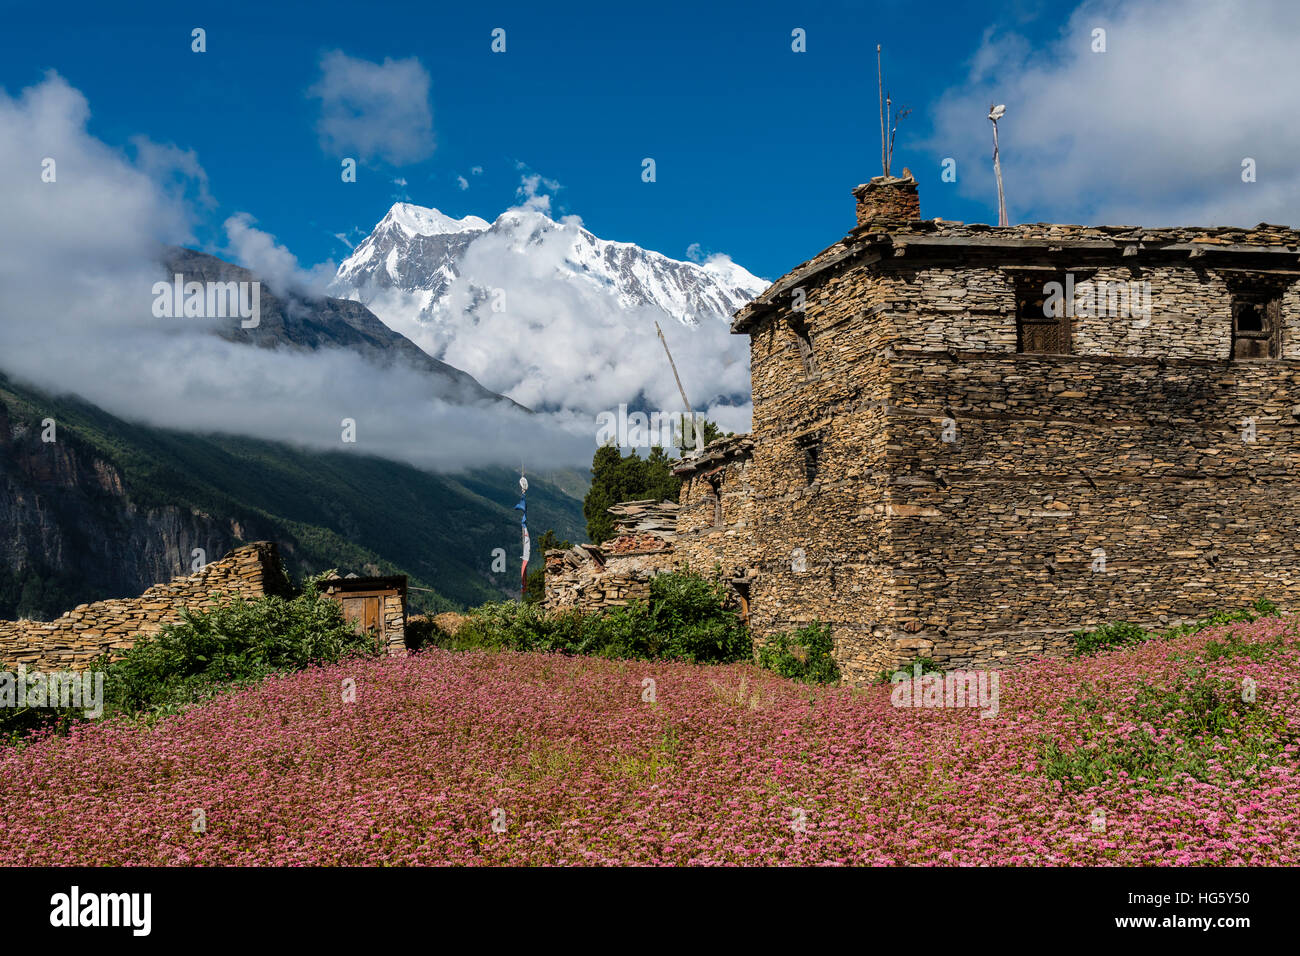 Farmhouse with pink buckwheat fields in blossom, Upper Marsyangdi valley, mountain Annapurna 3 in distance, Ghyaru Stock Photo